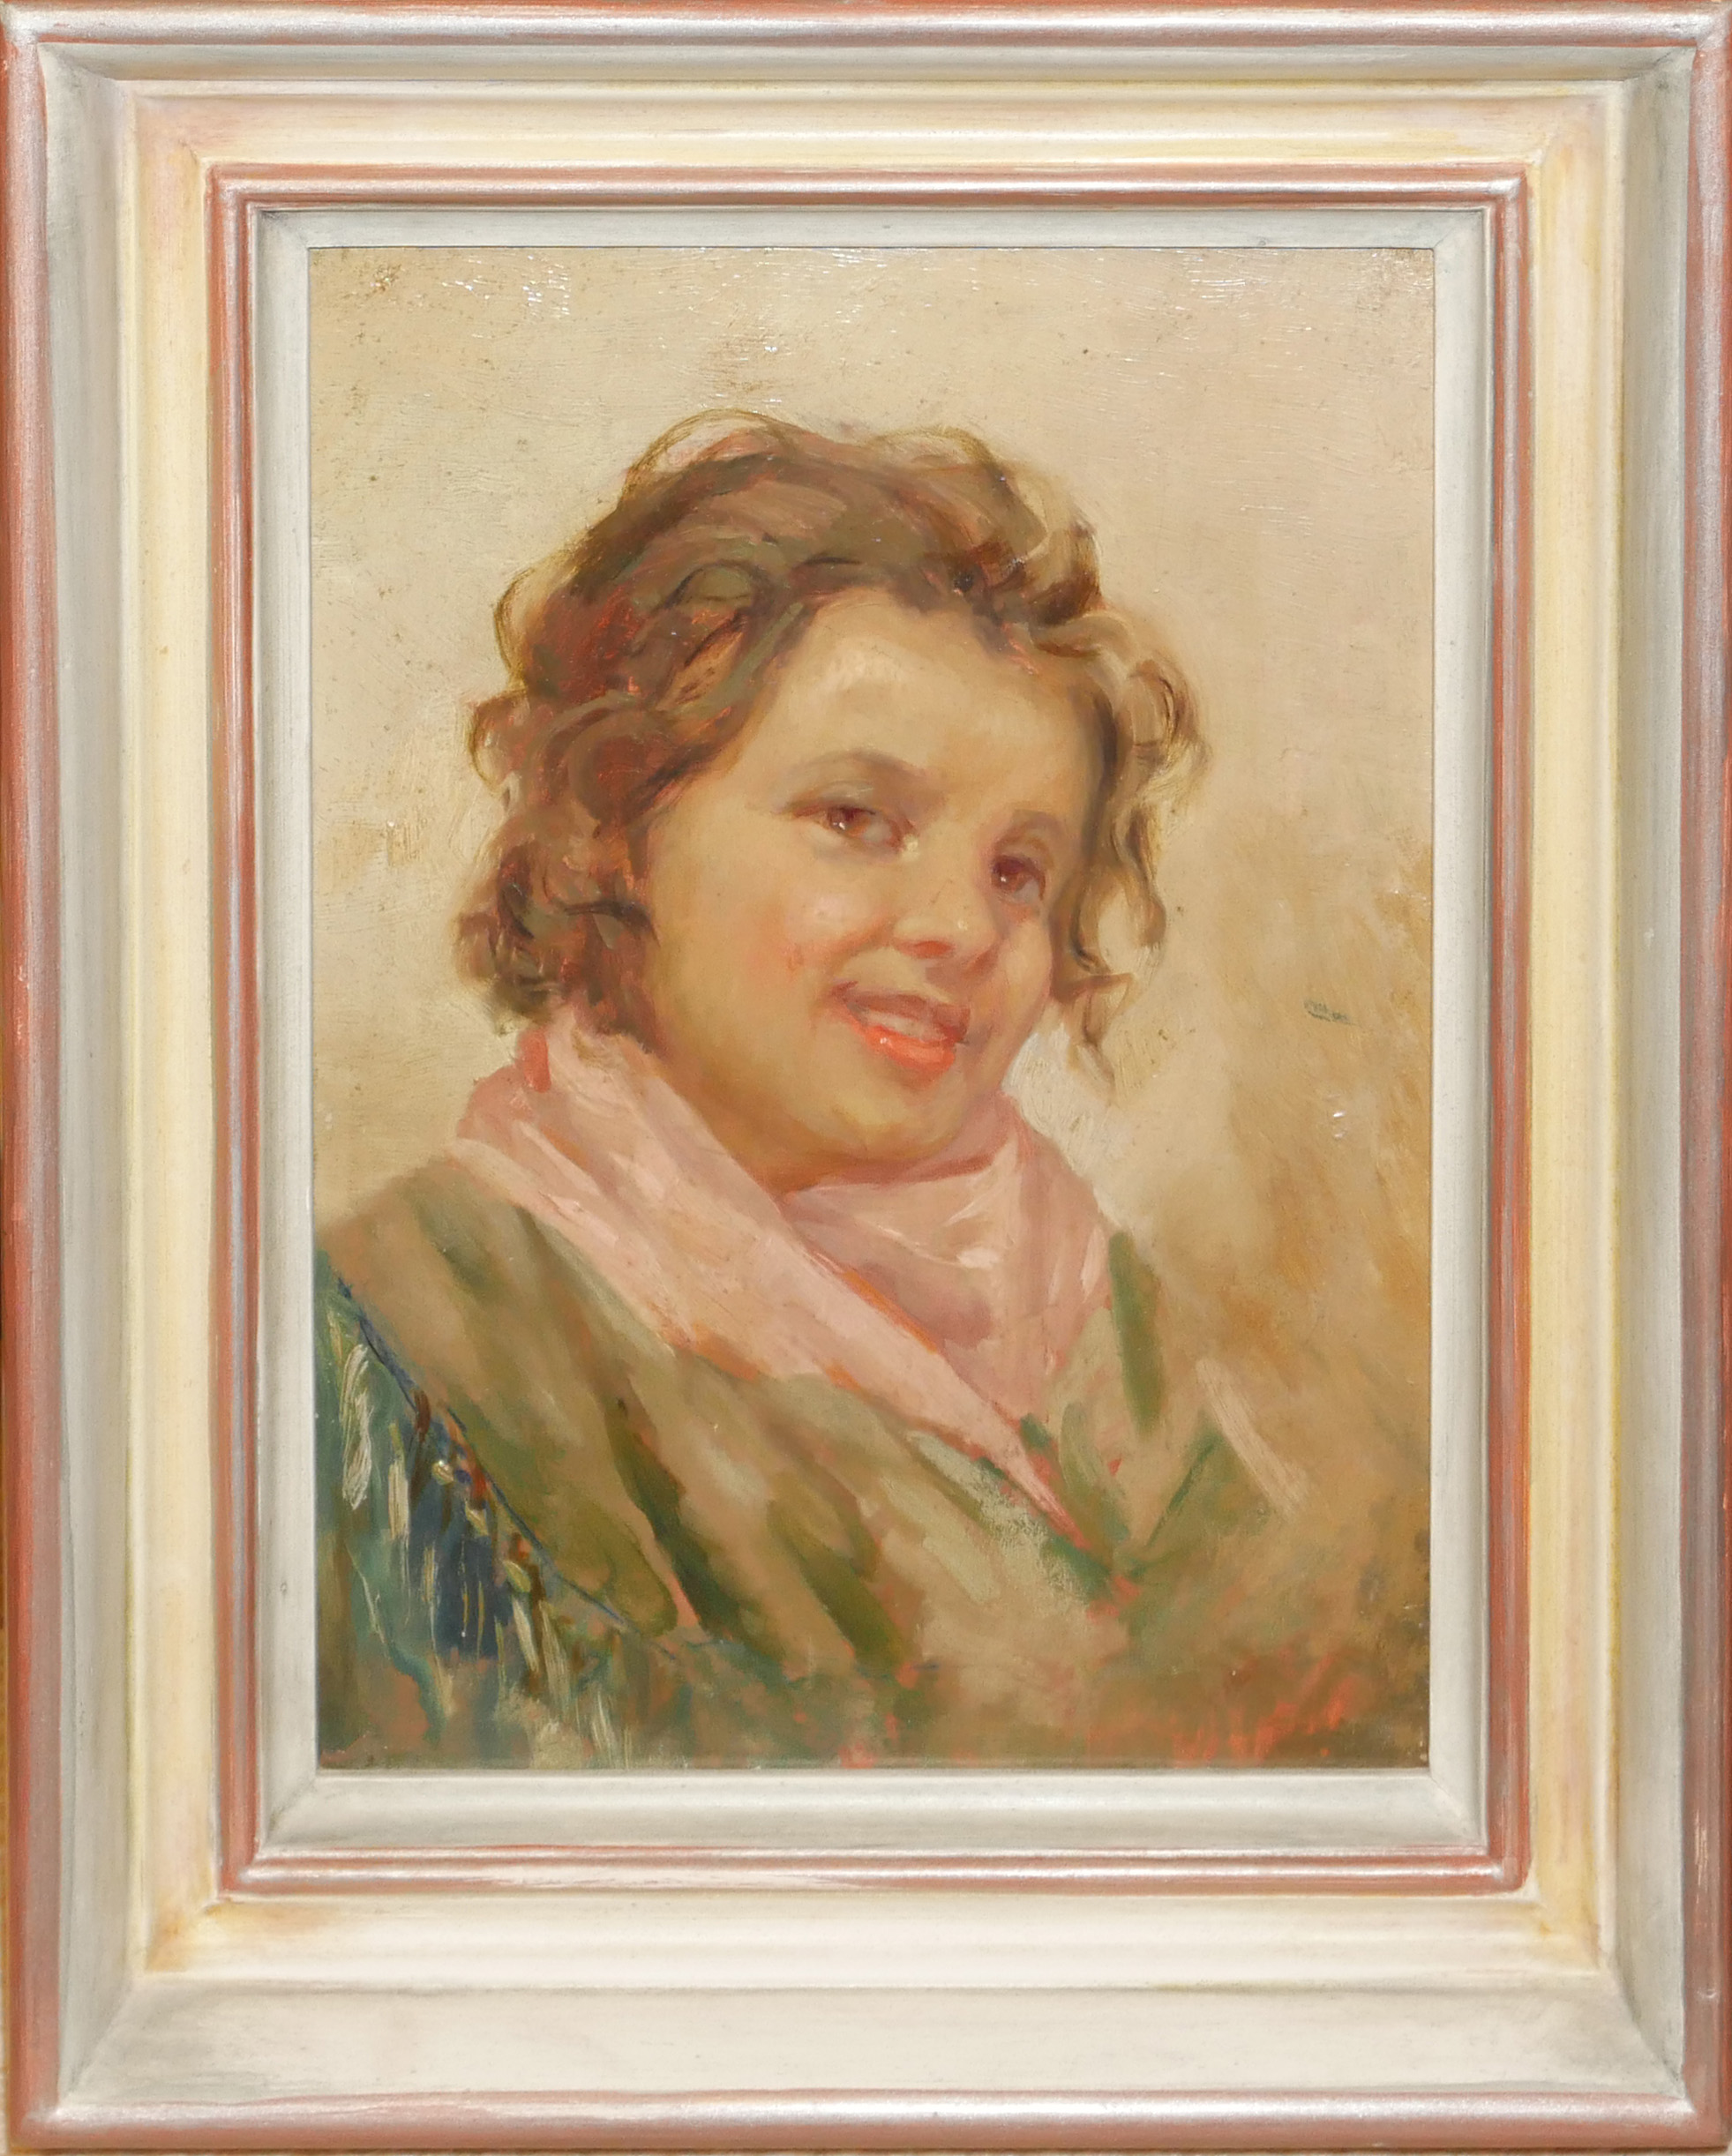 UNKNOWN ARTIST (XX), OIL ON CANVAS, AN EARLY 20TH CENTURY CONTINENTAL PORTRAIT OF A SMILING - Image 2 of 5